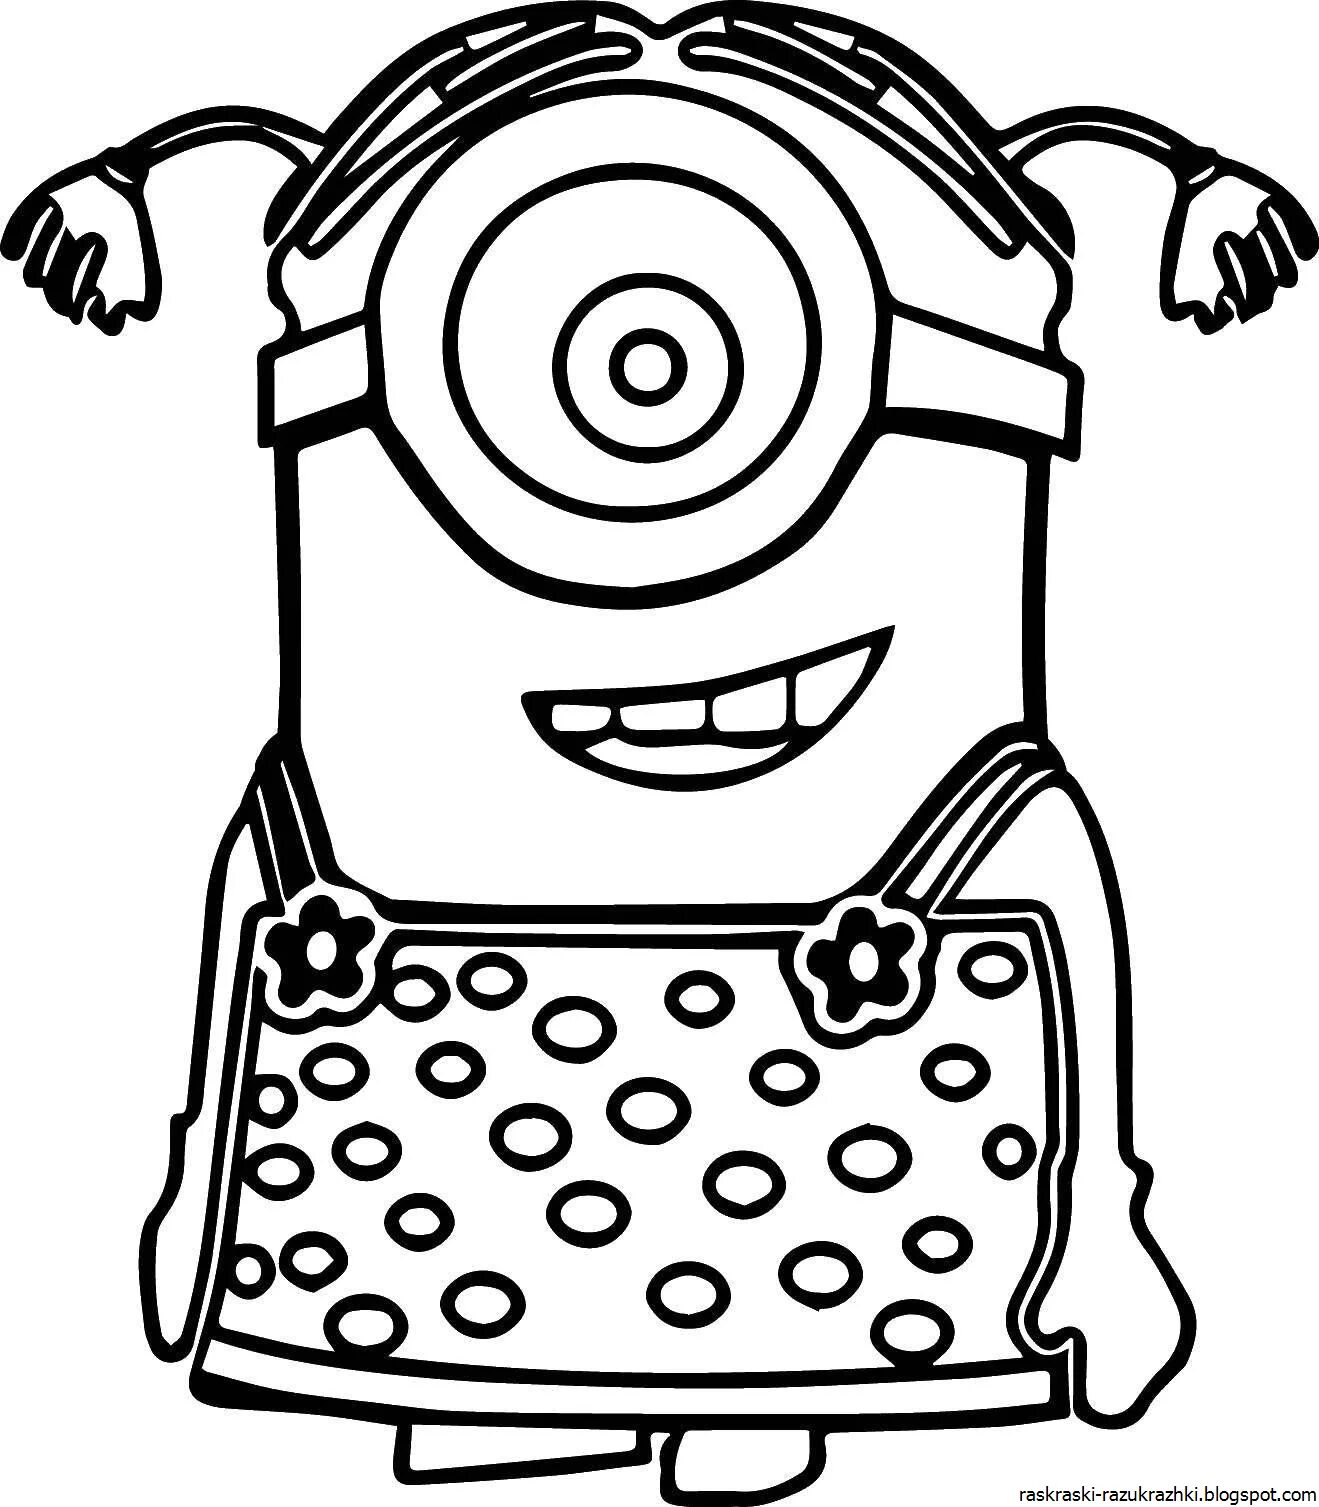 For girls minions #12